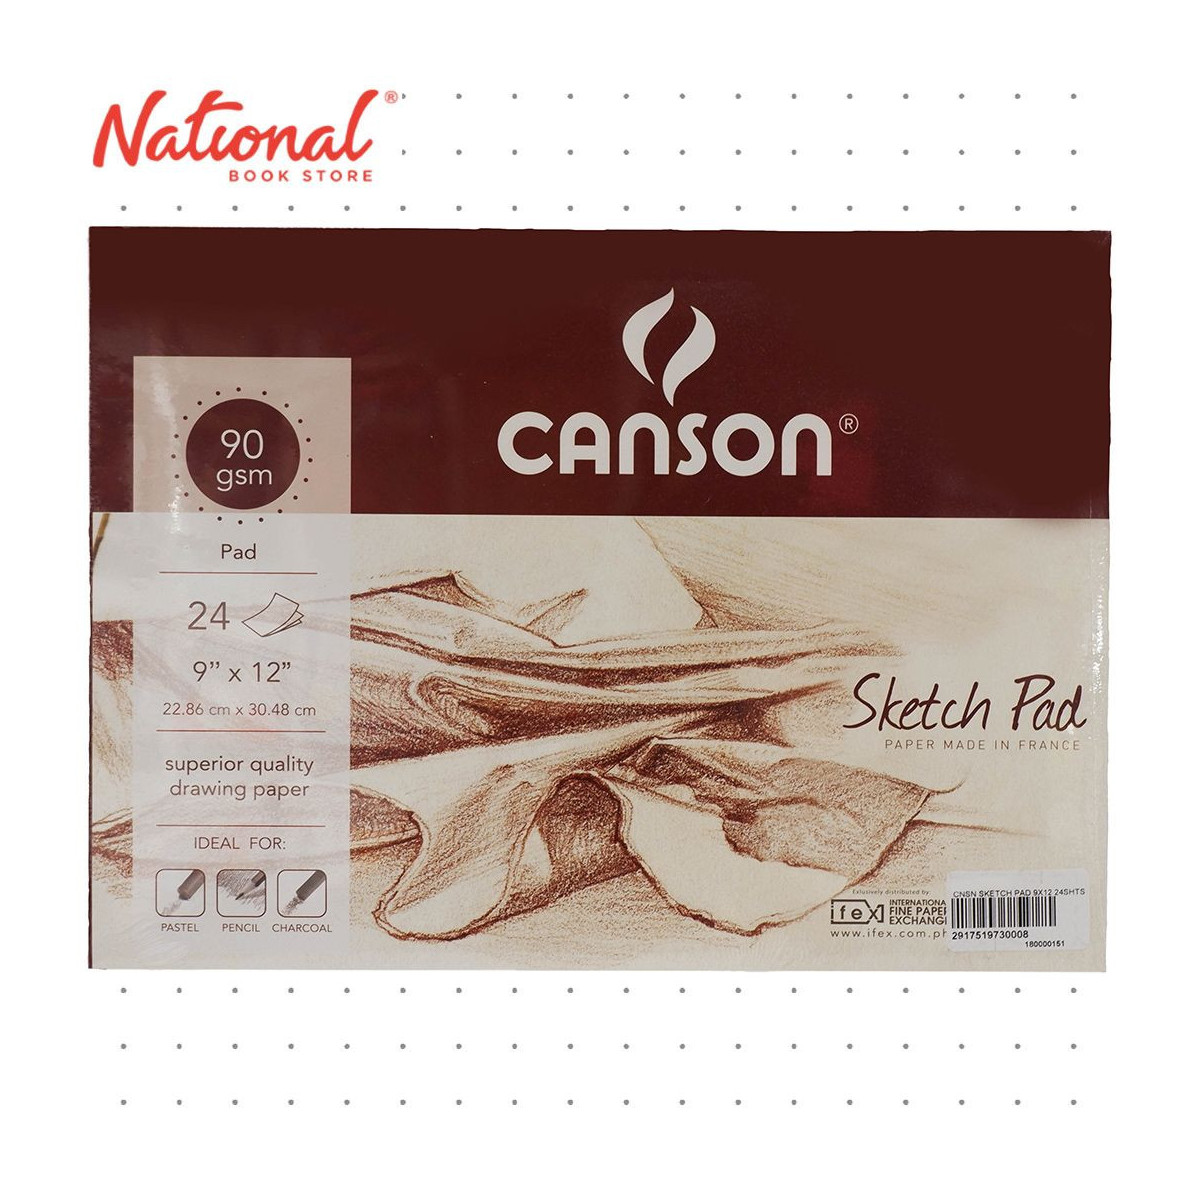 https://www.nationalbookstore.com/118601-thickbox_default/canson-sketch-pad-9x12-24-sheets-padded-90gsm-white.jpg